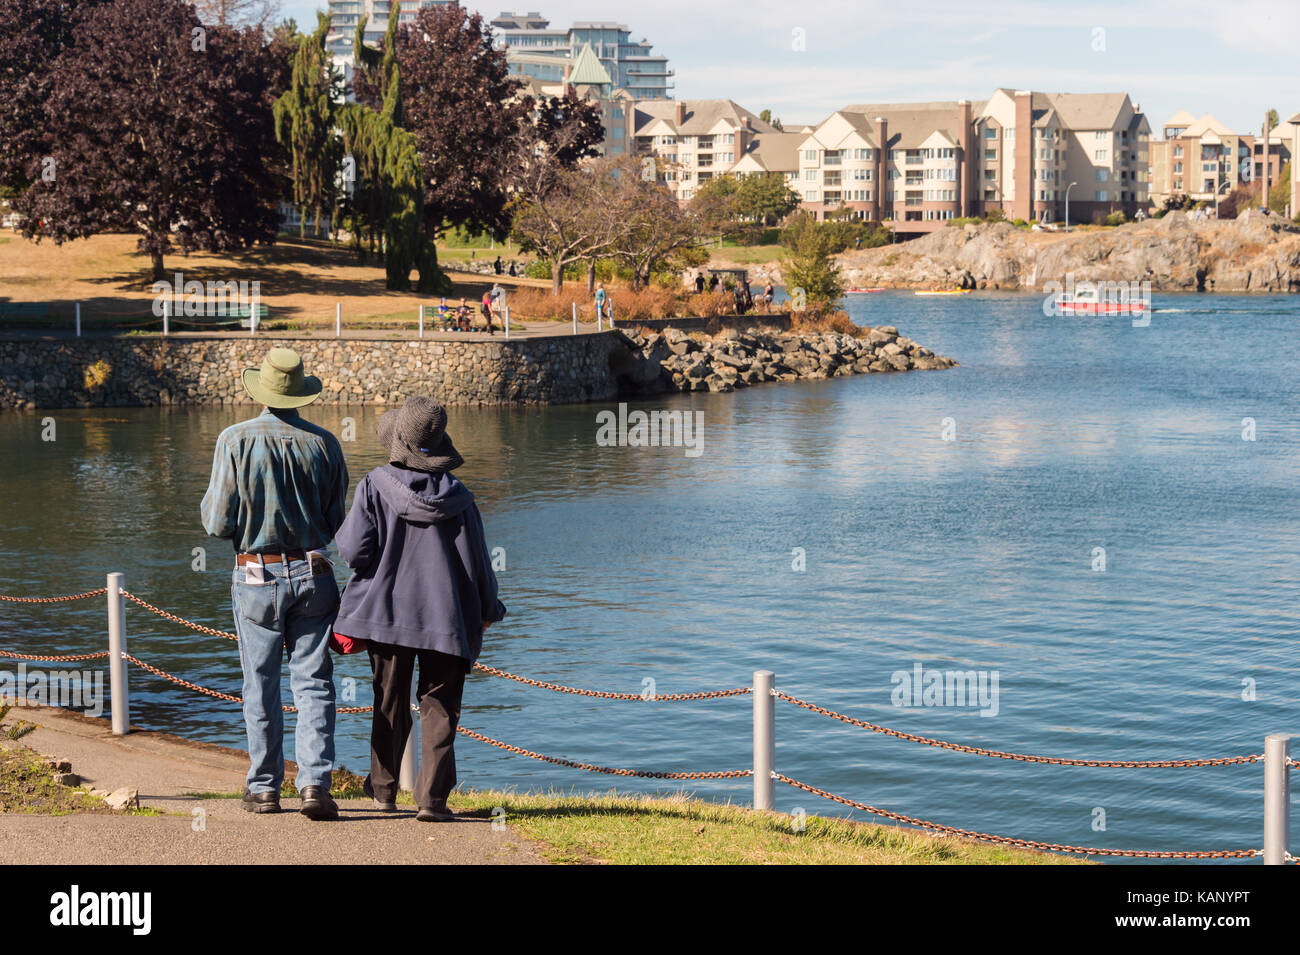 Victoria, BC, Canada - 11 September 2017: People walking on David Foster Way Stock Photo